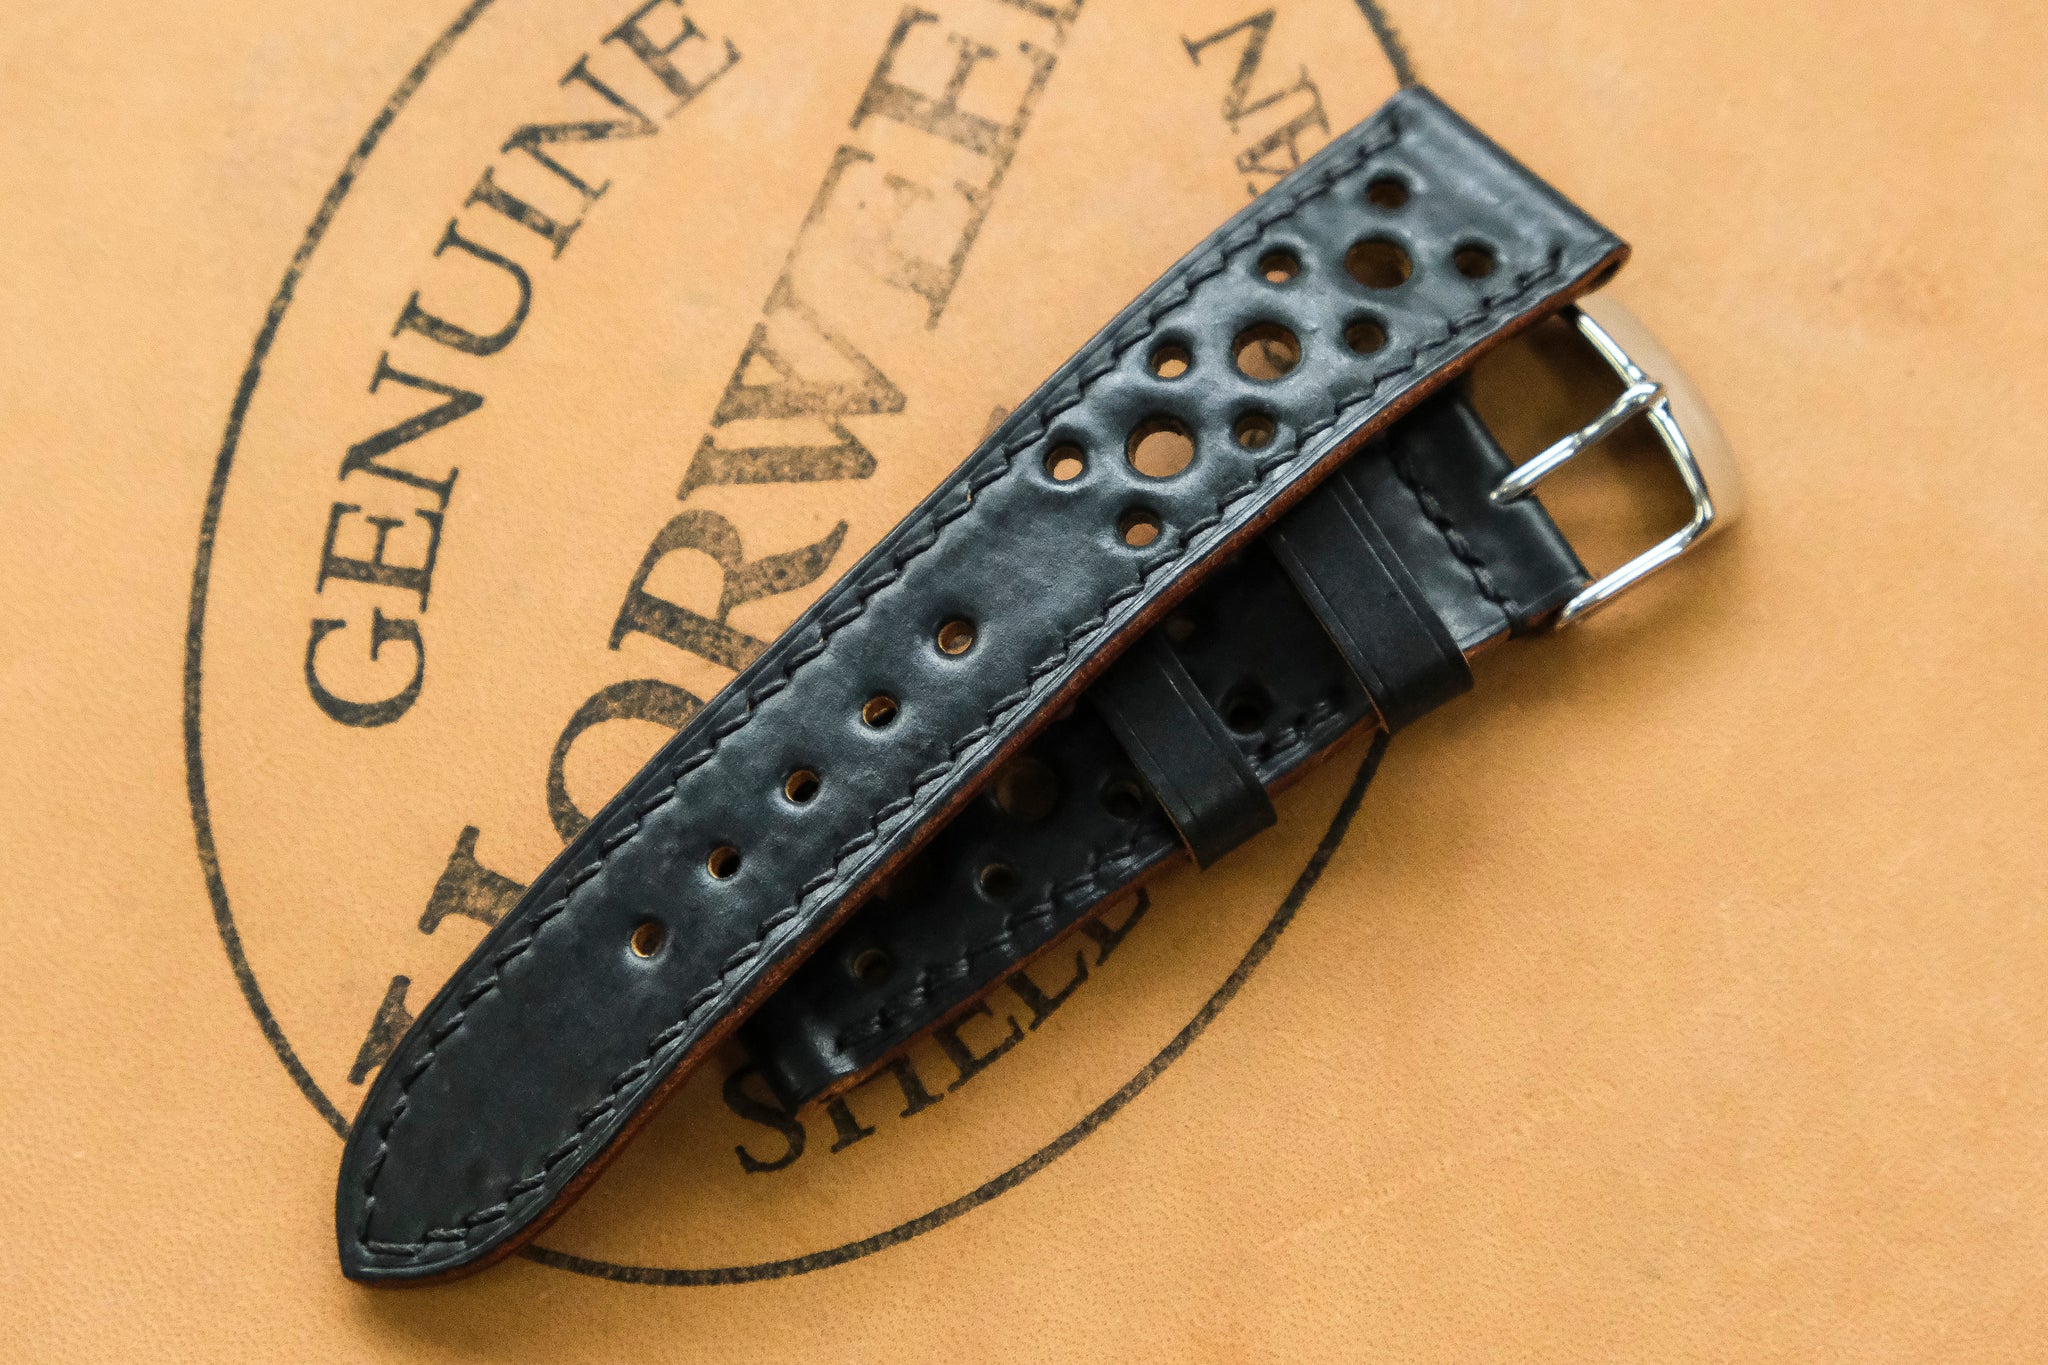  20mm Black Genuine Leather Watch Band